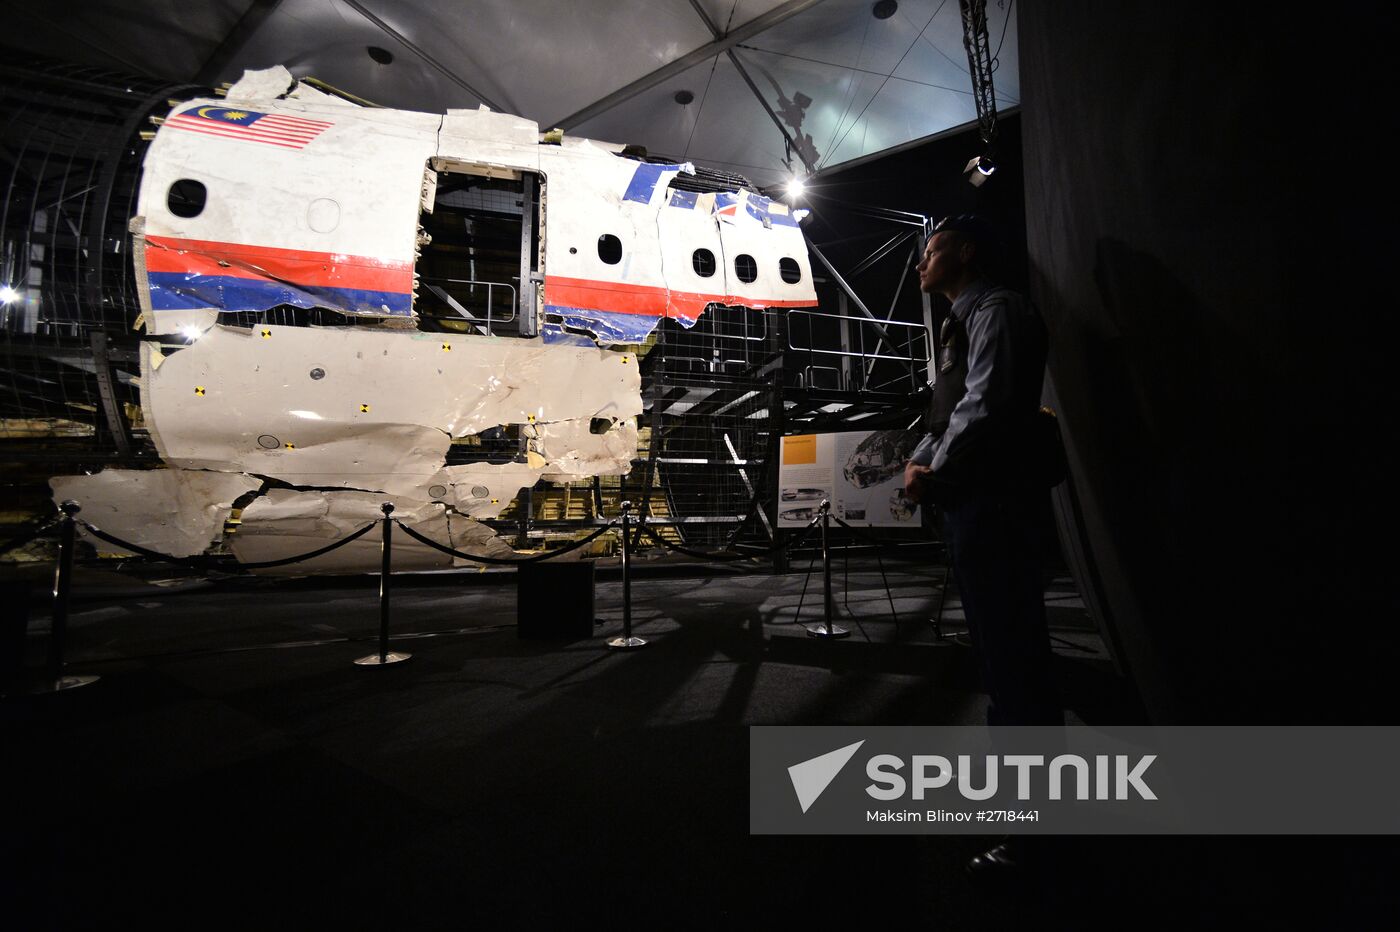 Dutch Safety Board releases report into Malaysia Airlines Flight 17 disaster